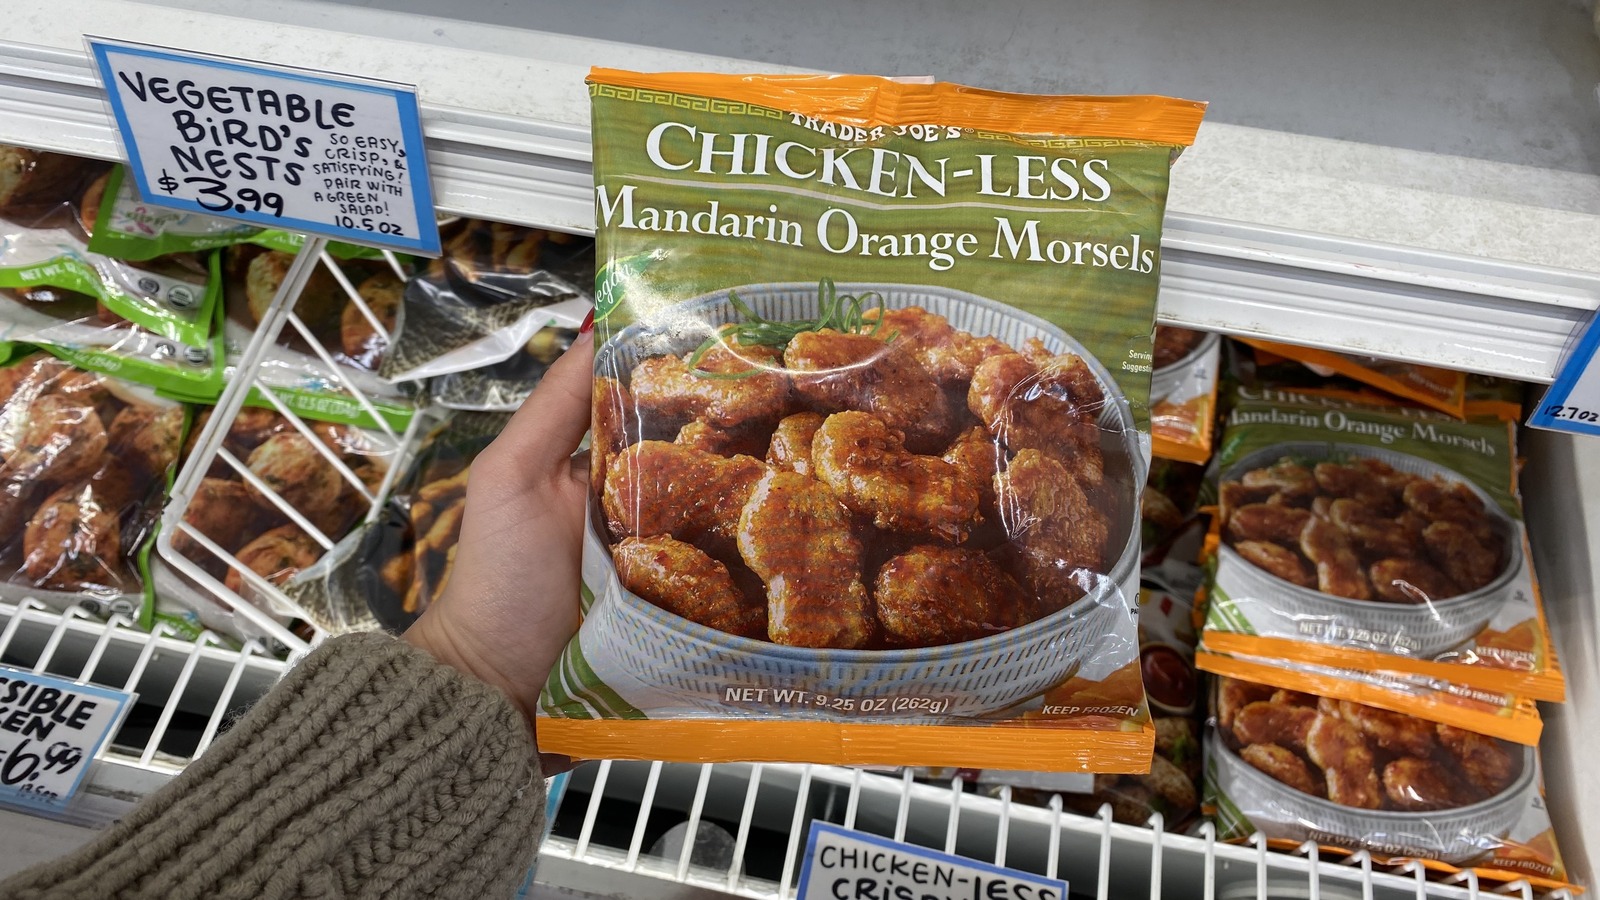 https://www.tastingtable.com/img/gallery/trader-joes-vegan-mandarin-chicken-does-not-live-up-to-the-hype/l-intro-1683022684.jpg